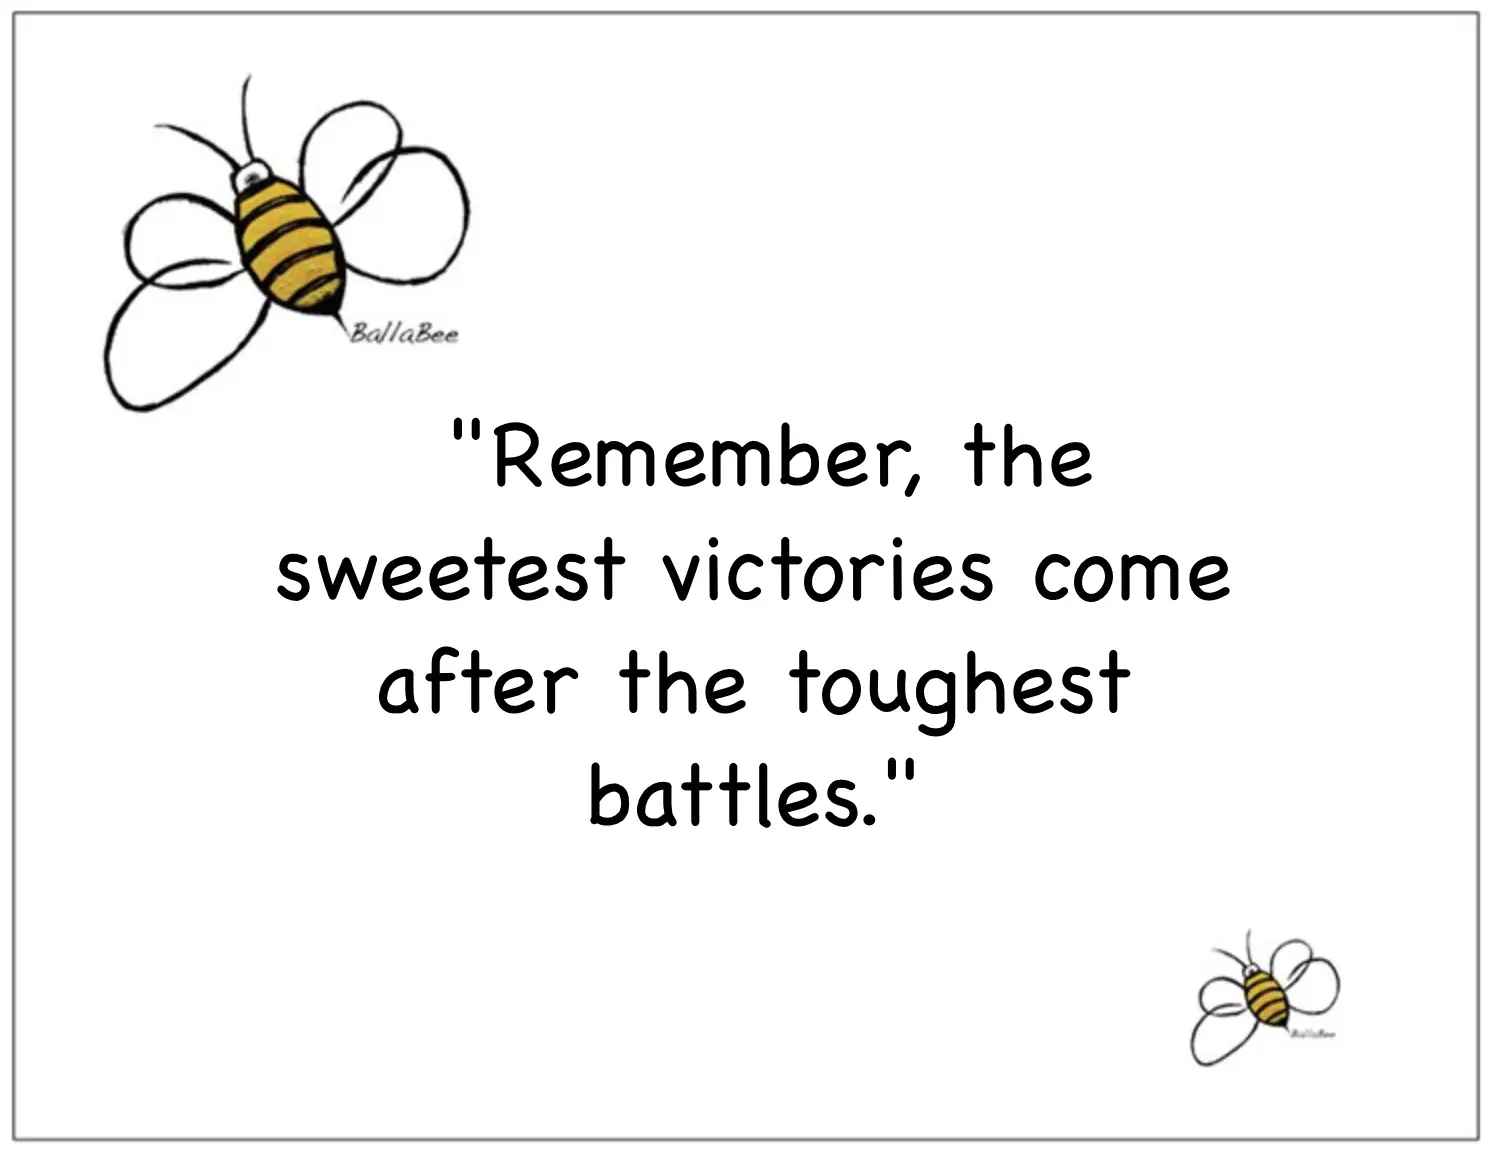 Remember, the sweetest victories come after the toughest battles